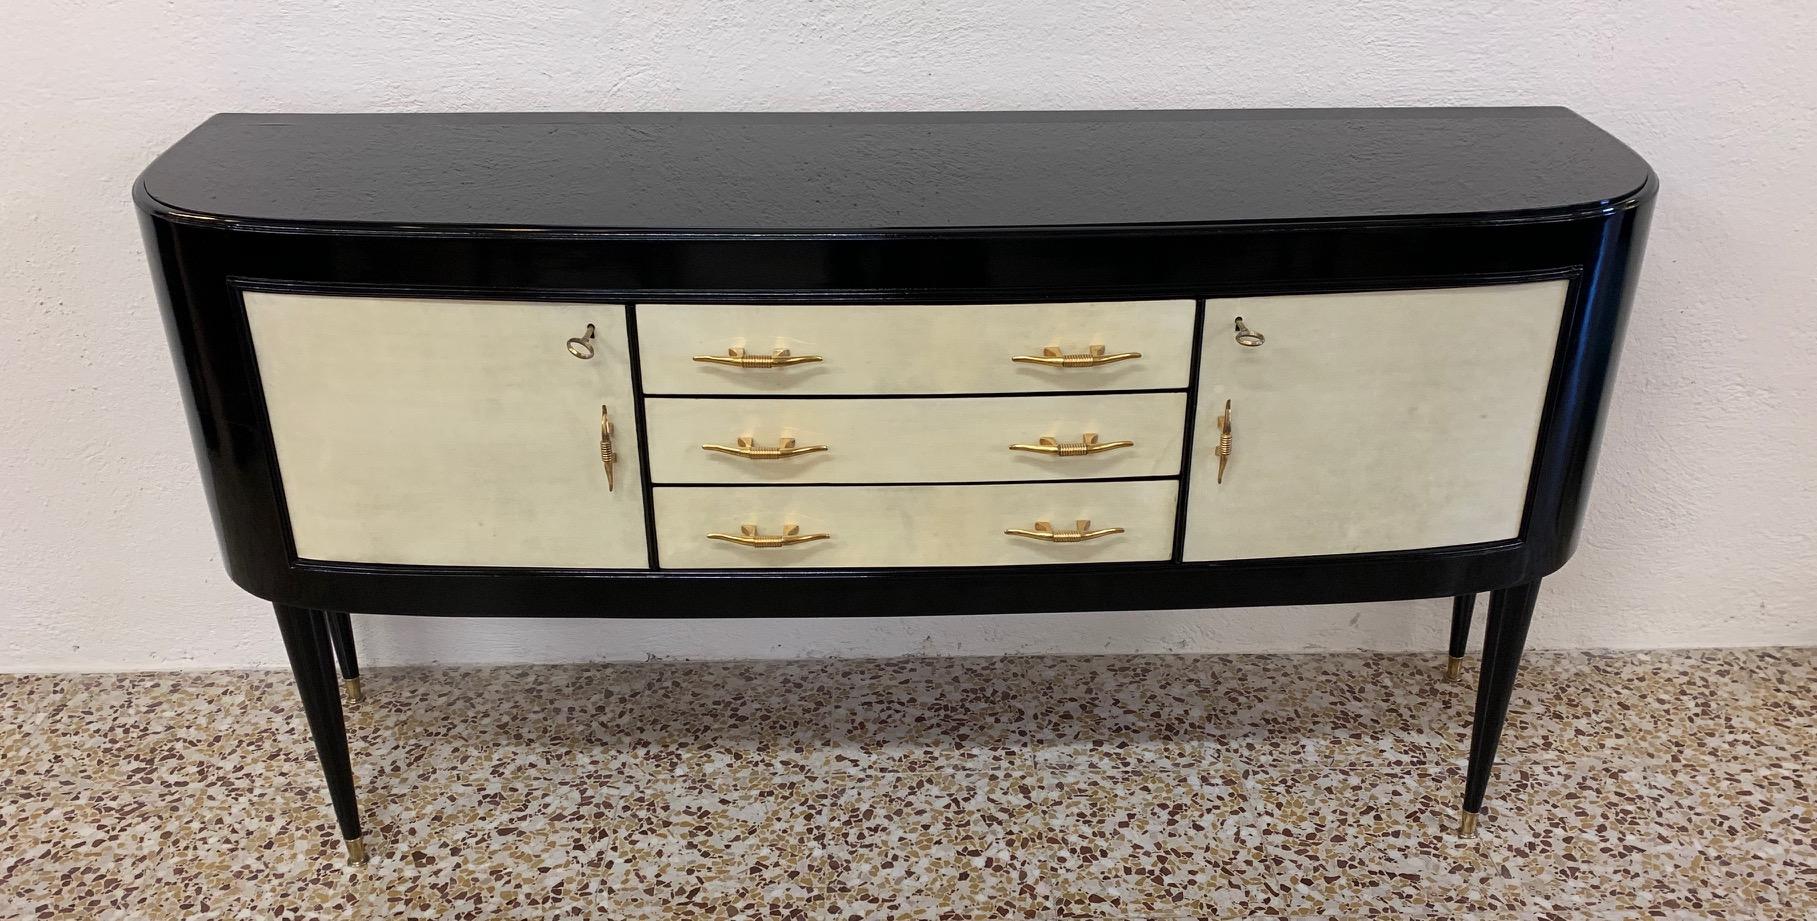 This sideboard was produced in the 1940s in Italy.
Two doors and three drawers are covered in parchment while the structure is black lacquered.
The handles are in brass while the top is in black glass.